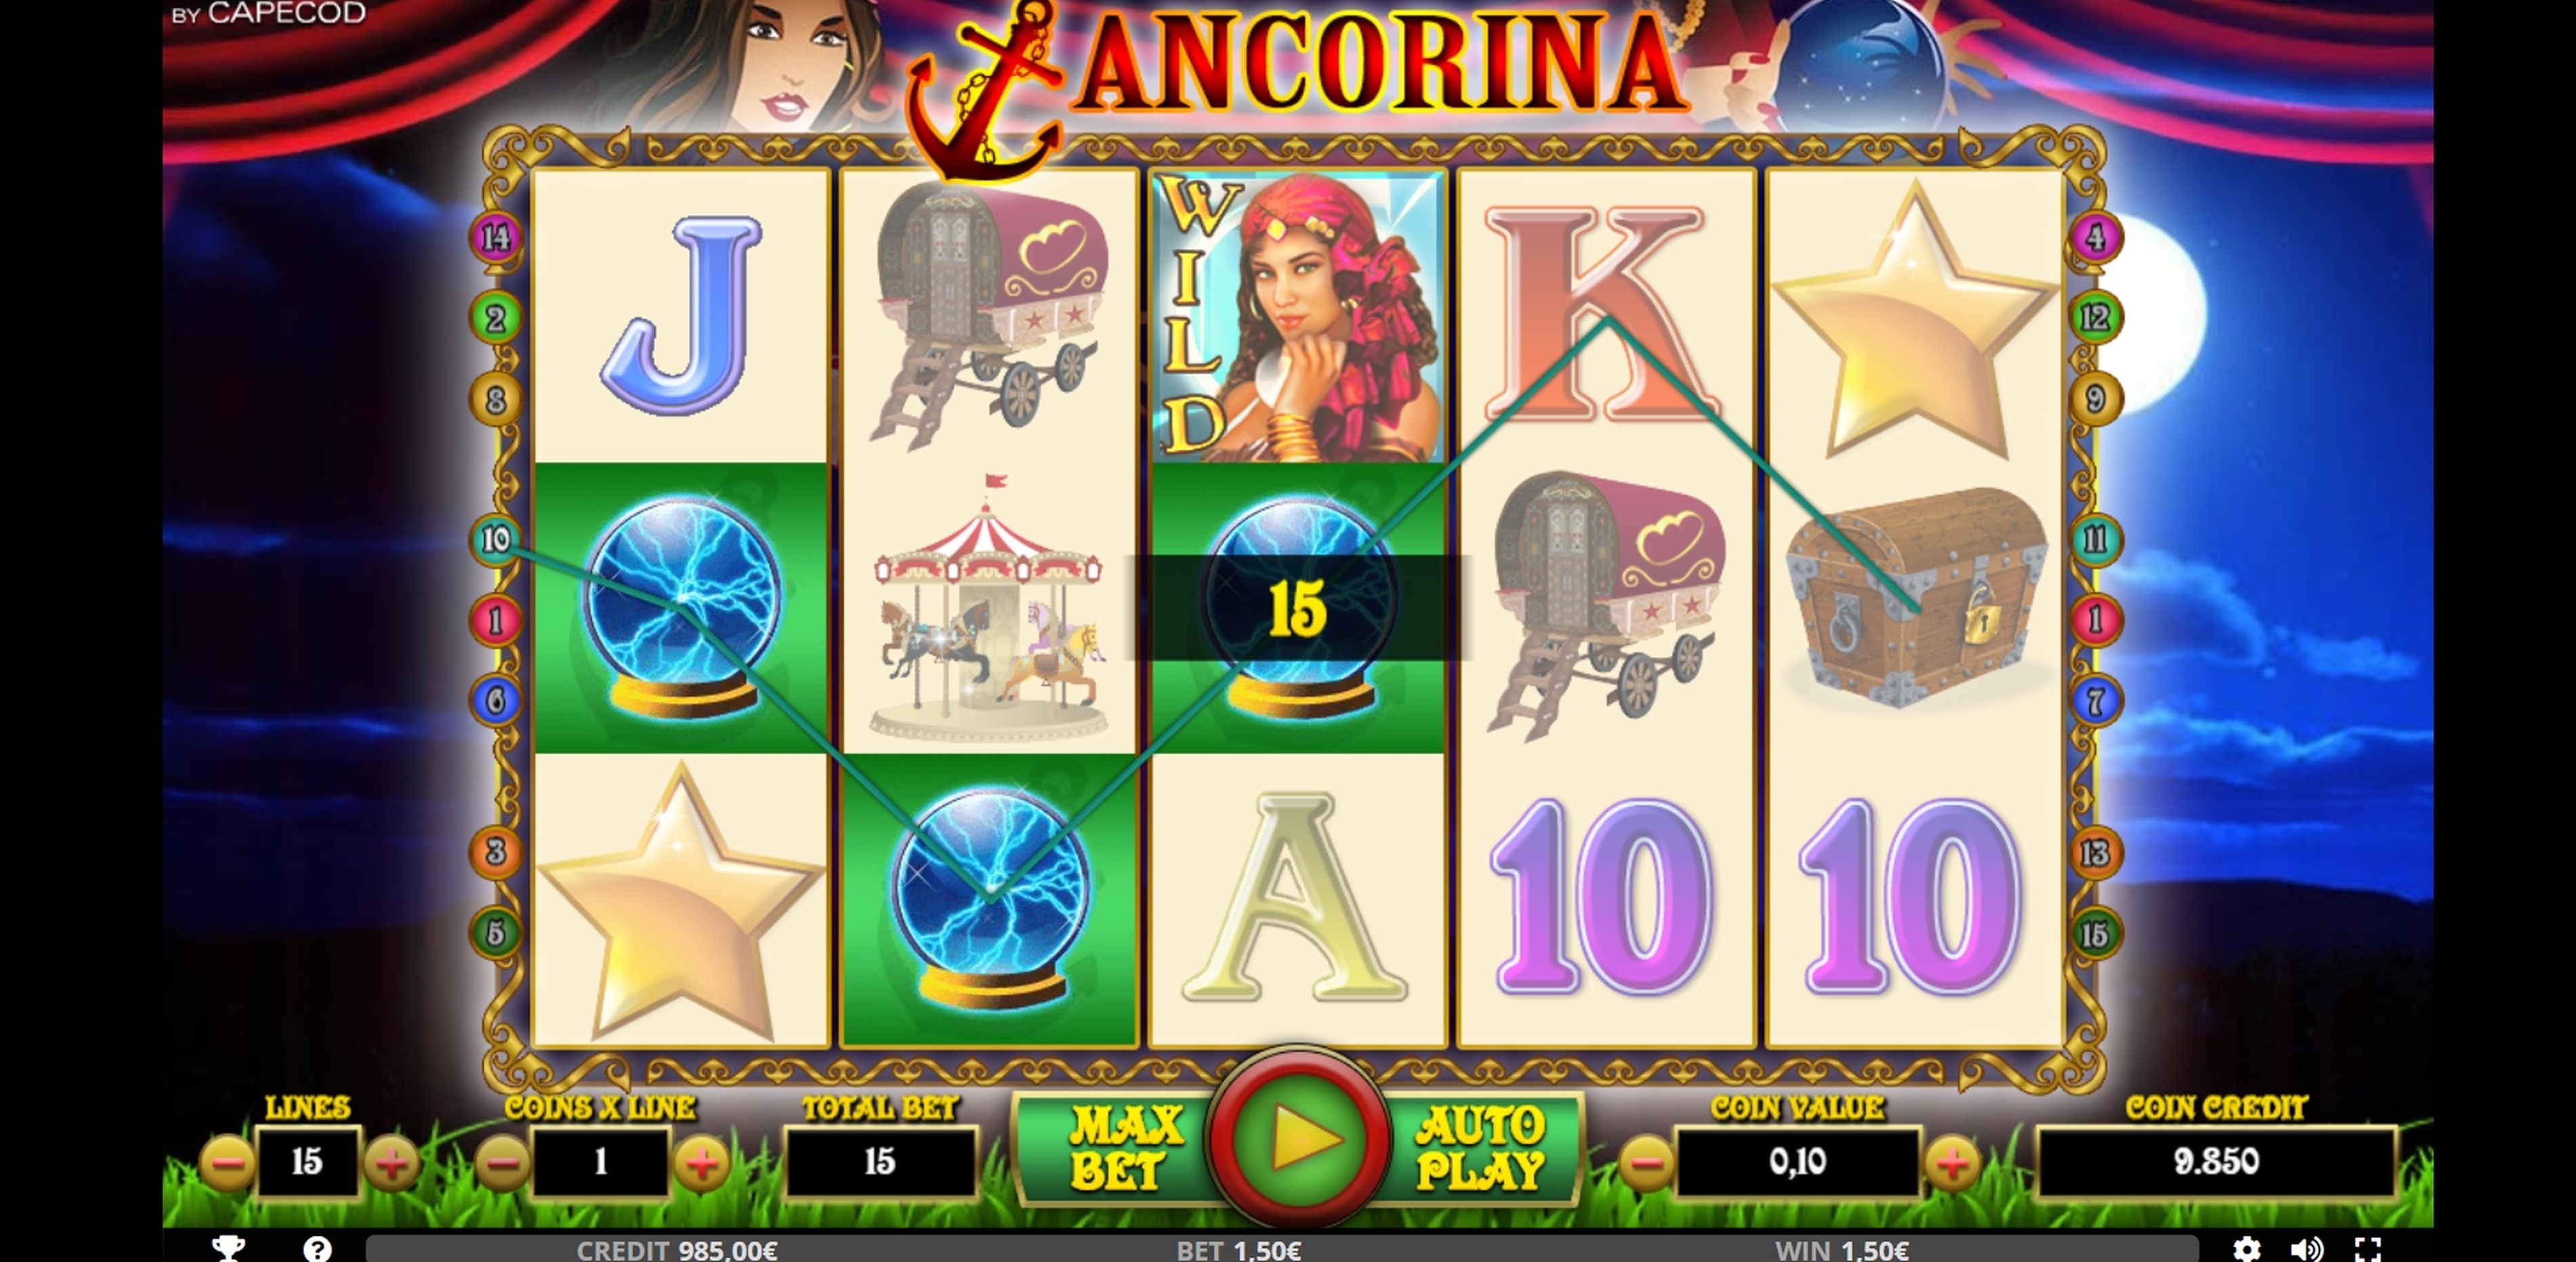 Win Money in ANCORINA Free Slot Game by Capecod Gaming